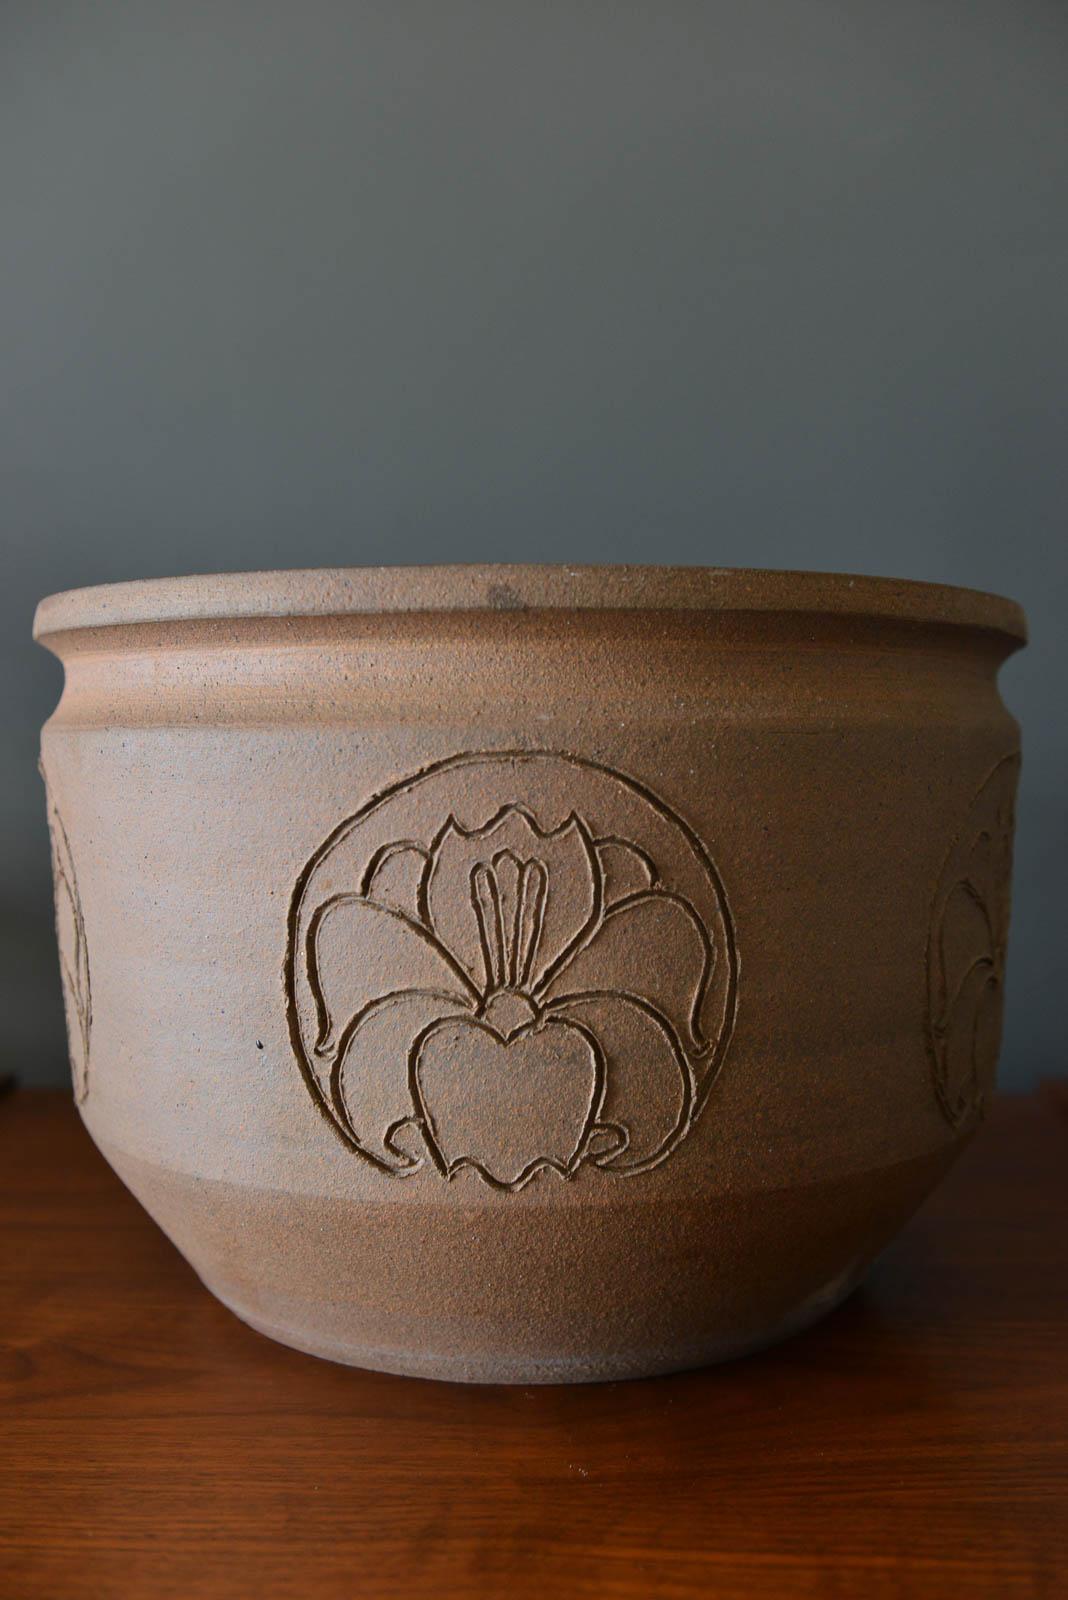 David Cressey Robert Maxwell incised flower motif planter, circa 1970. Glazed on the inside with a nice black finish and hand-incised with 5 orchid motifs around the entire body. Measures 14.5